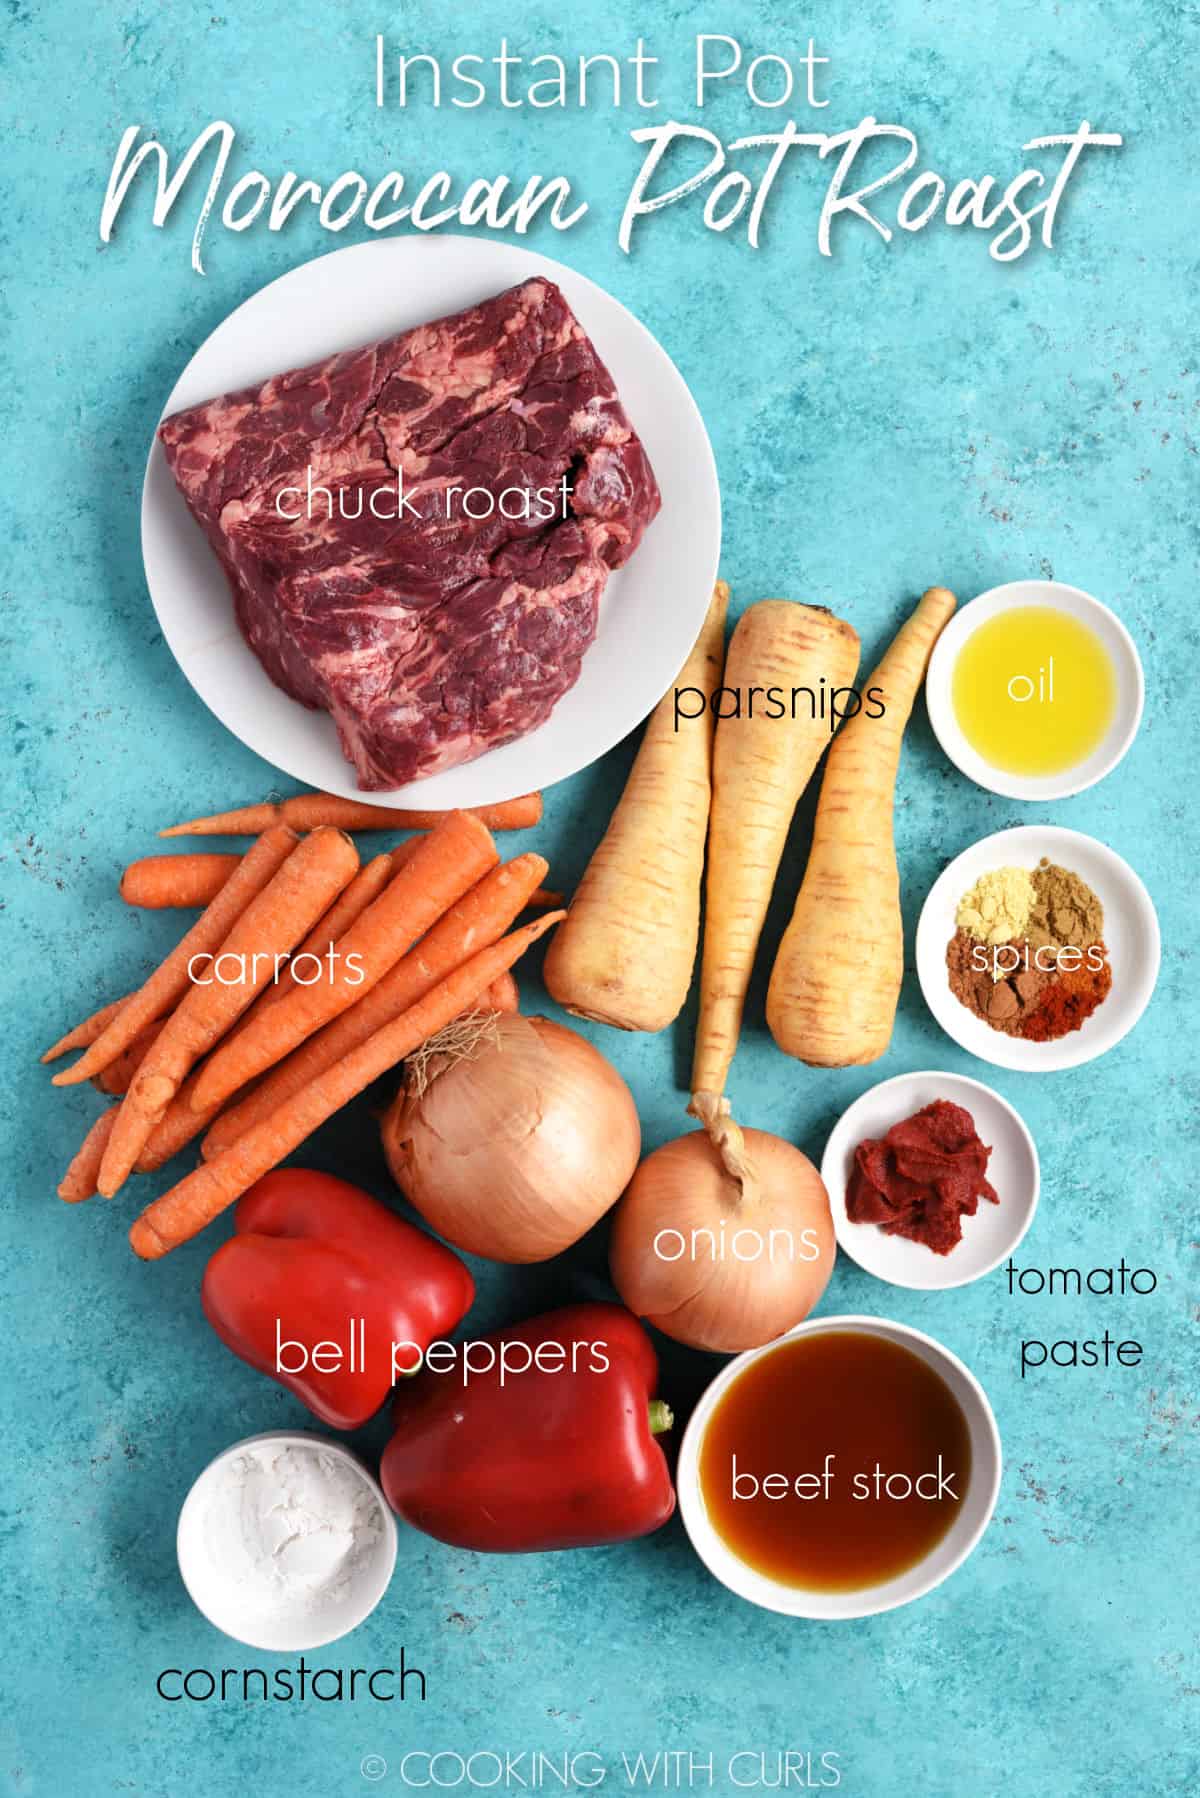 Chuck roast, oil, spices, three parsnips, a bunch of carrots, two onions, two bell peppers, tomato paste, beef stock and cornstarch on a turquoise background.